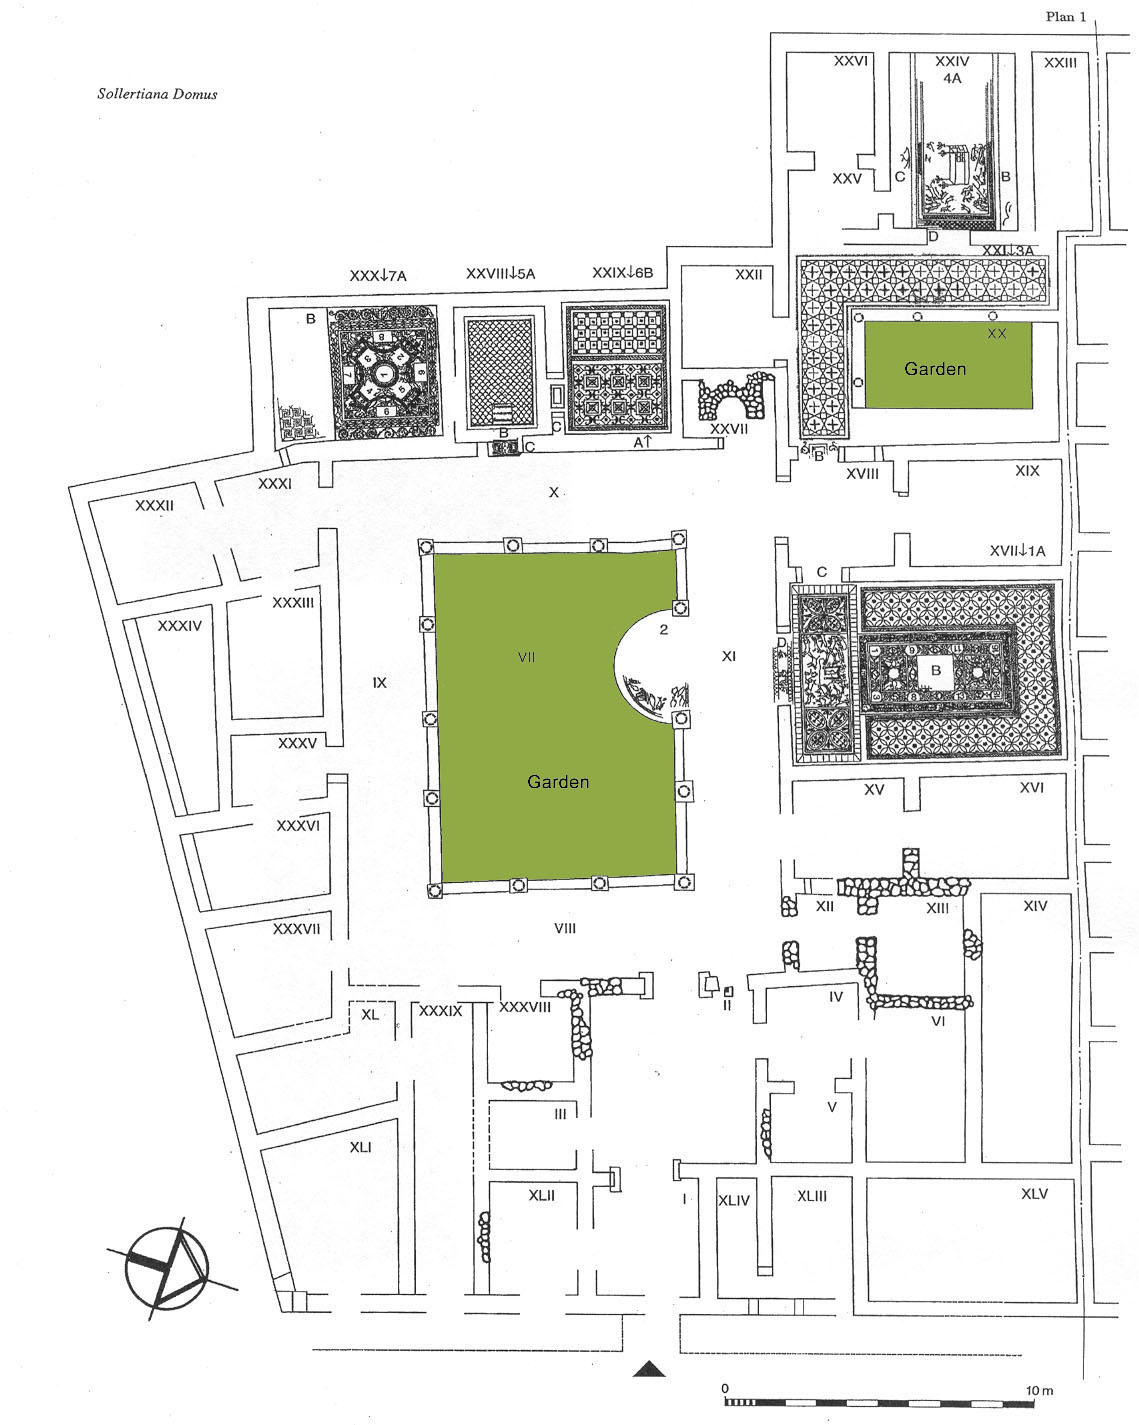 Fig. 1: Plan of the Sollertianna Domus.